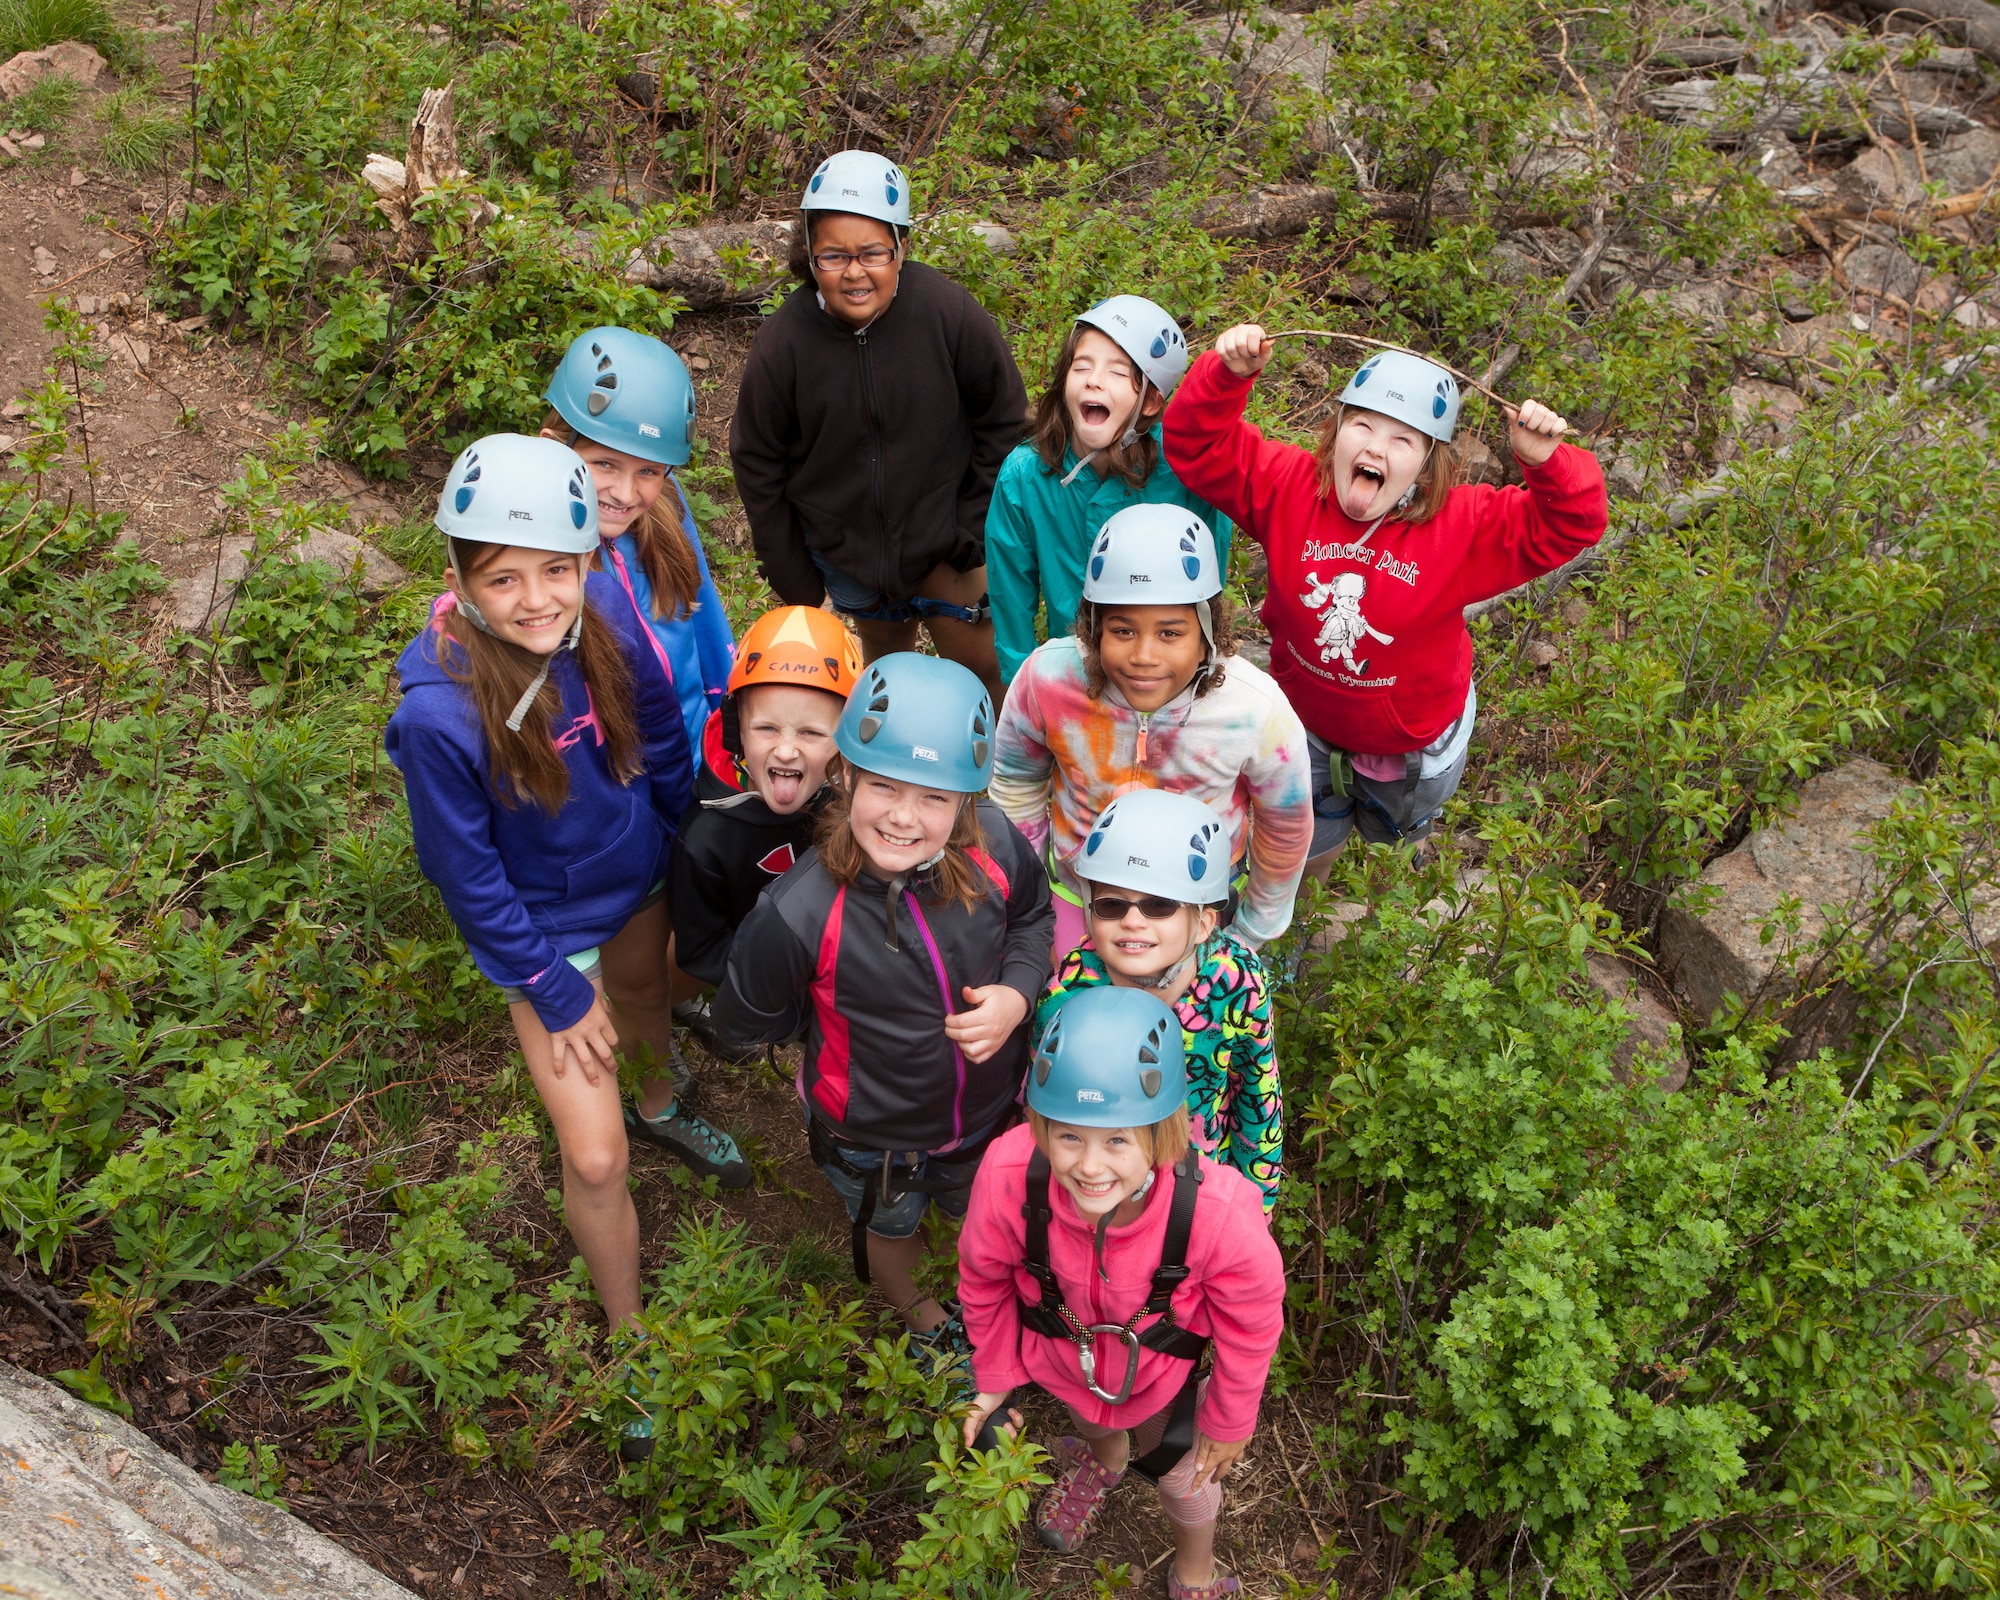 Children from F.E. Warren Air Force Base participating in Outdoor Recreation's Basic Recreation Adventure Training Camp pose for a group photo at the Vedauwoo Recreation Area in Medicine Bow National Forest, Wyo., June 10, 2015. The children were rock climbing that day. (U.S. Air Force photo by Lan Kim)